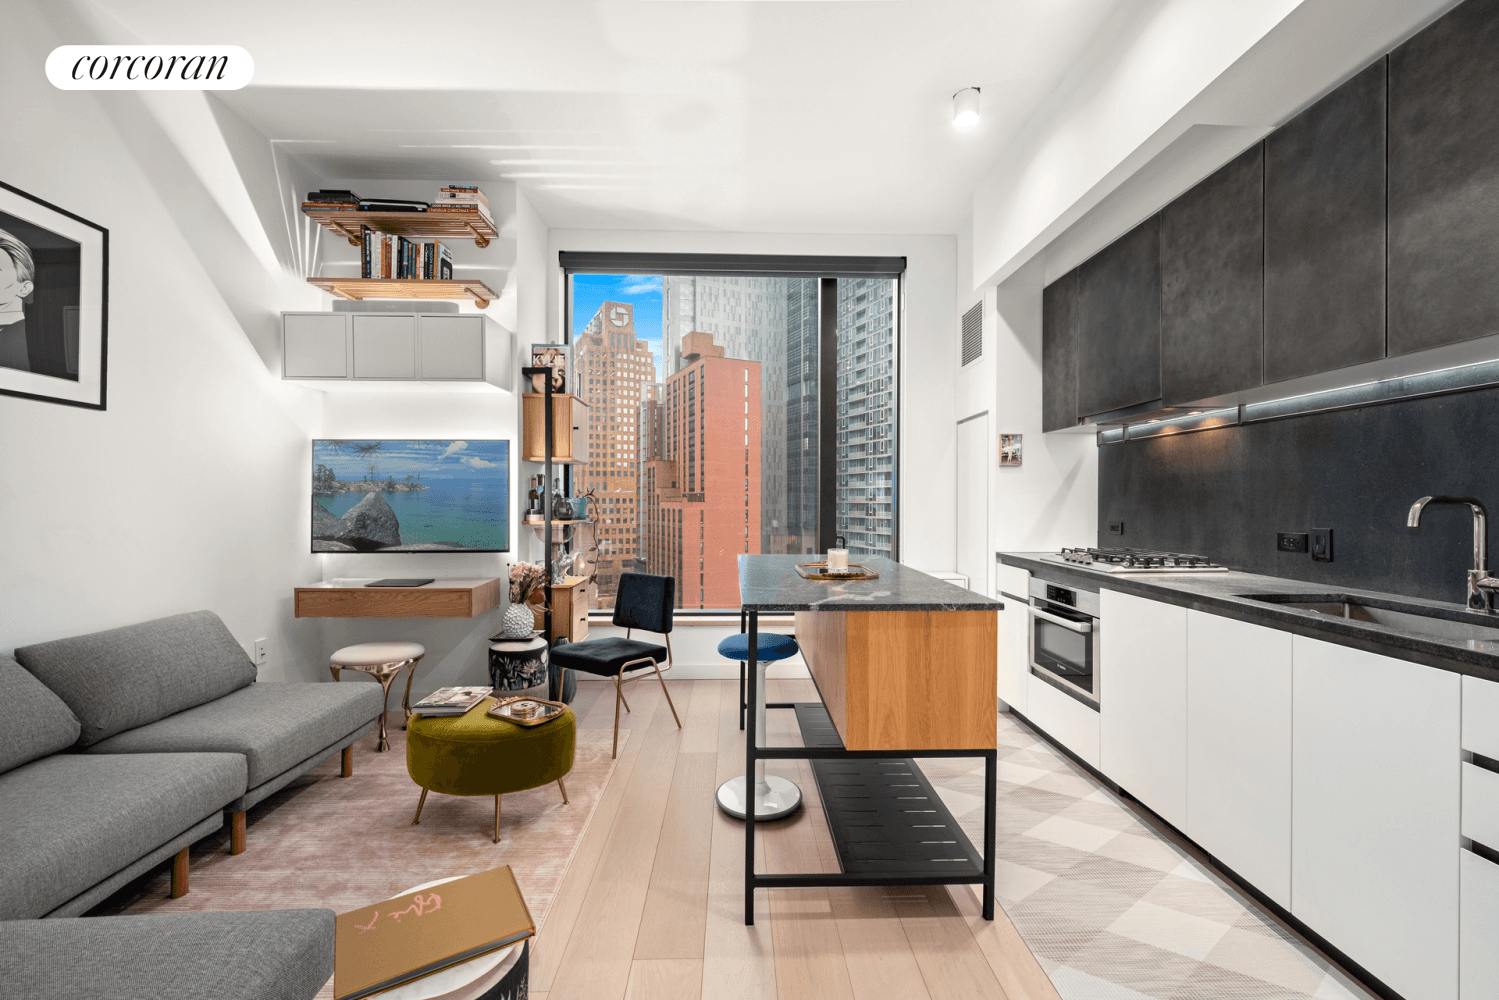 This alcove studio on the 12th floor of 11 Hoyt features lofty 10' ceilings and northern views over the Brooklyn cityscape.